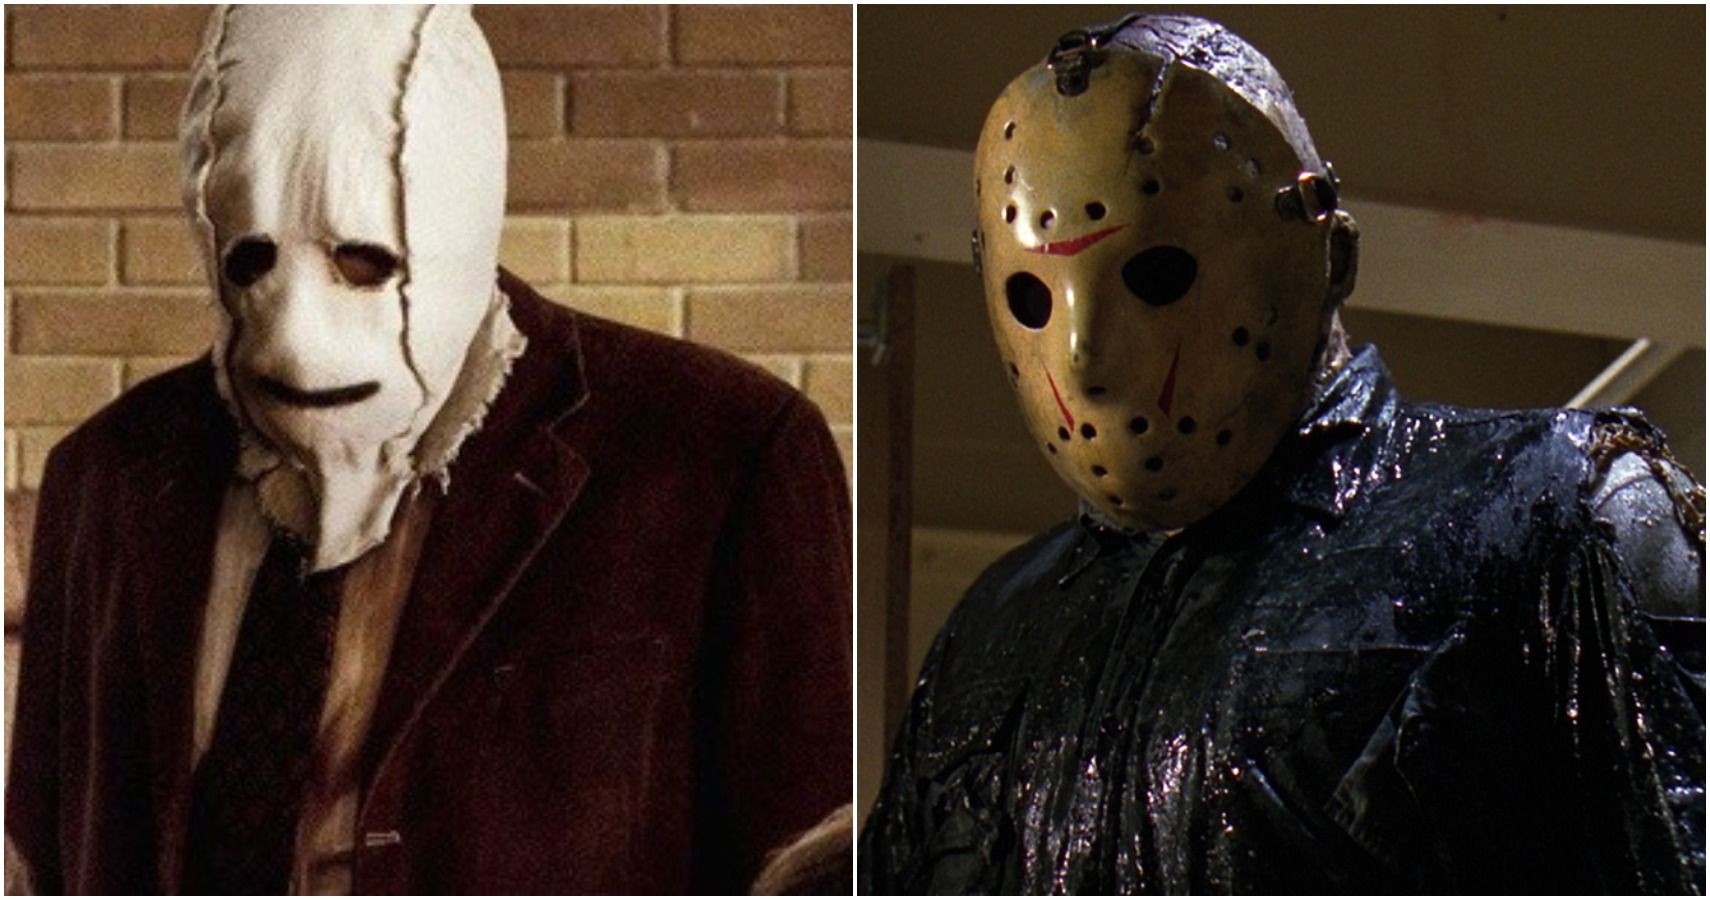 10 Of The Scariest Masked Horror Movie Maniacs Ranked